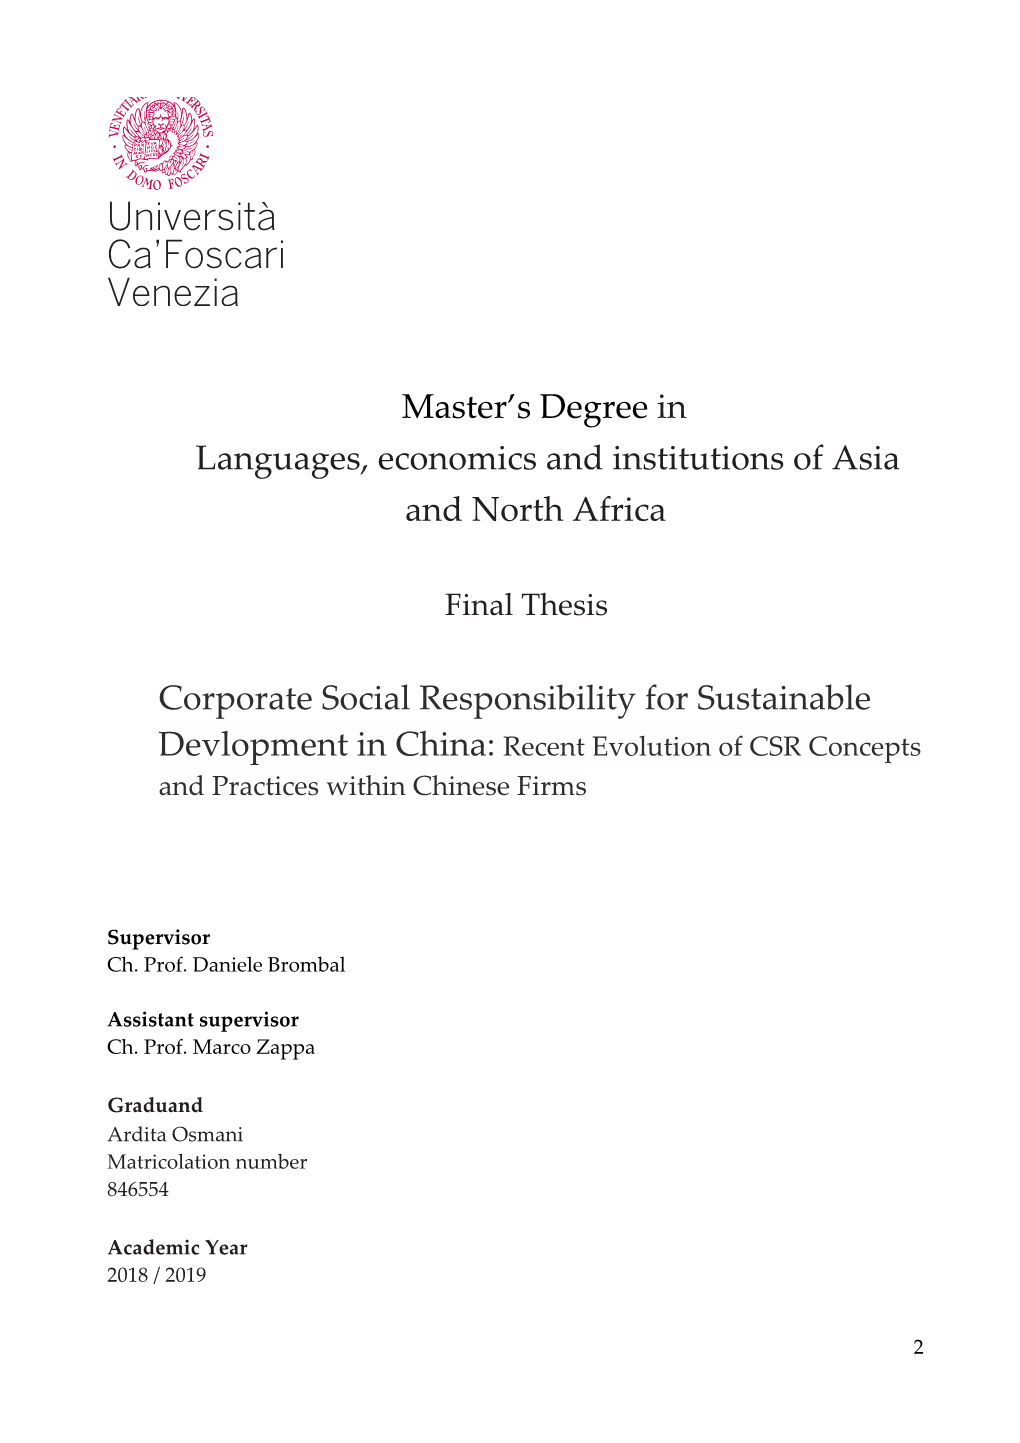 Languages, Economics and Institutions of Asia and North Africa